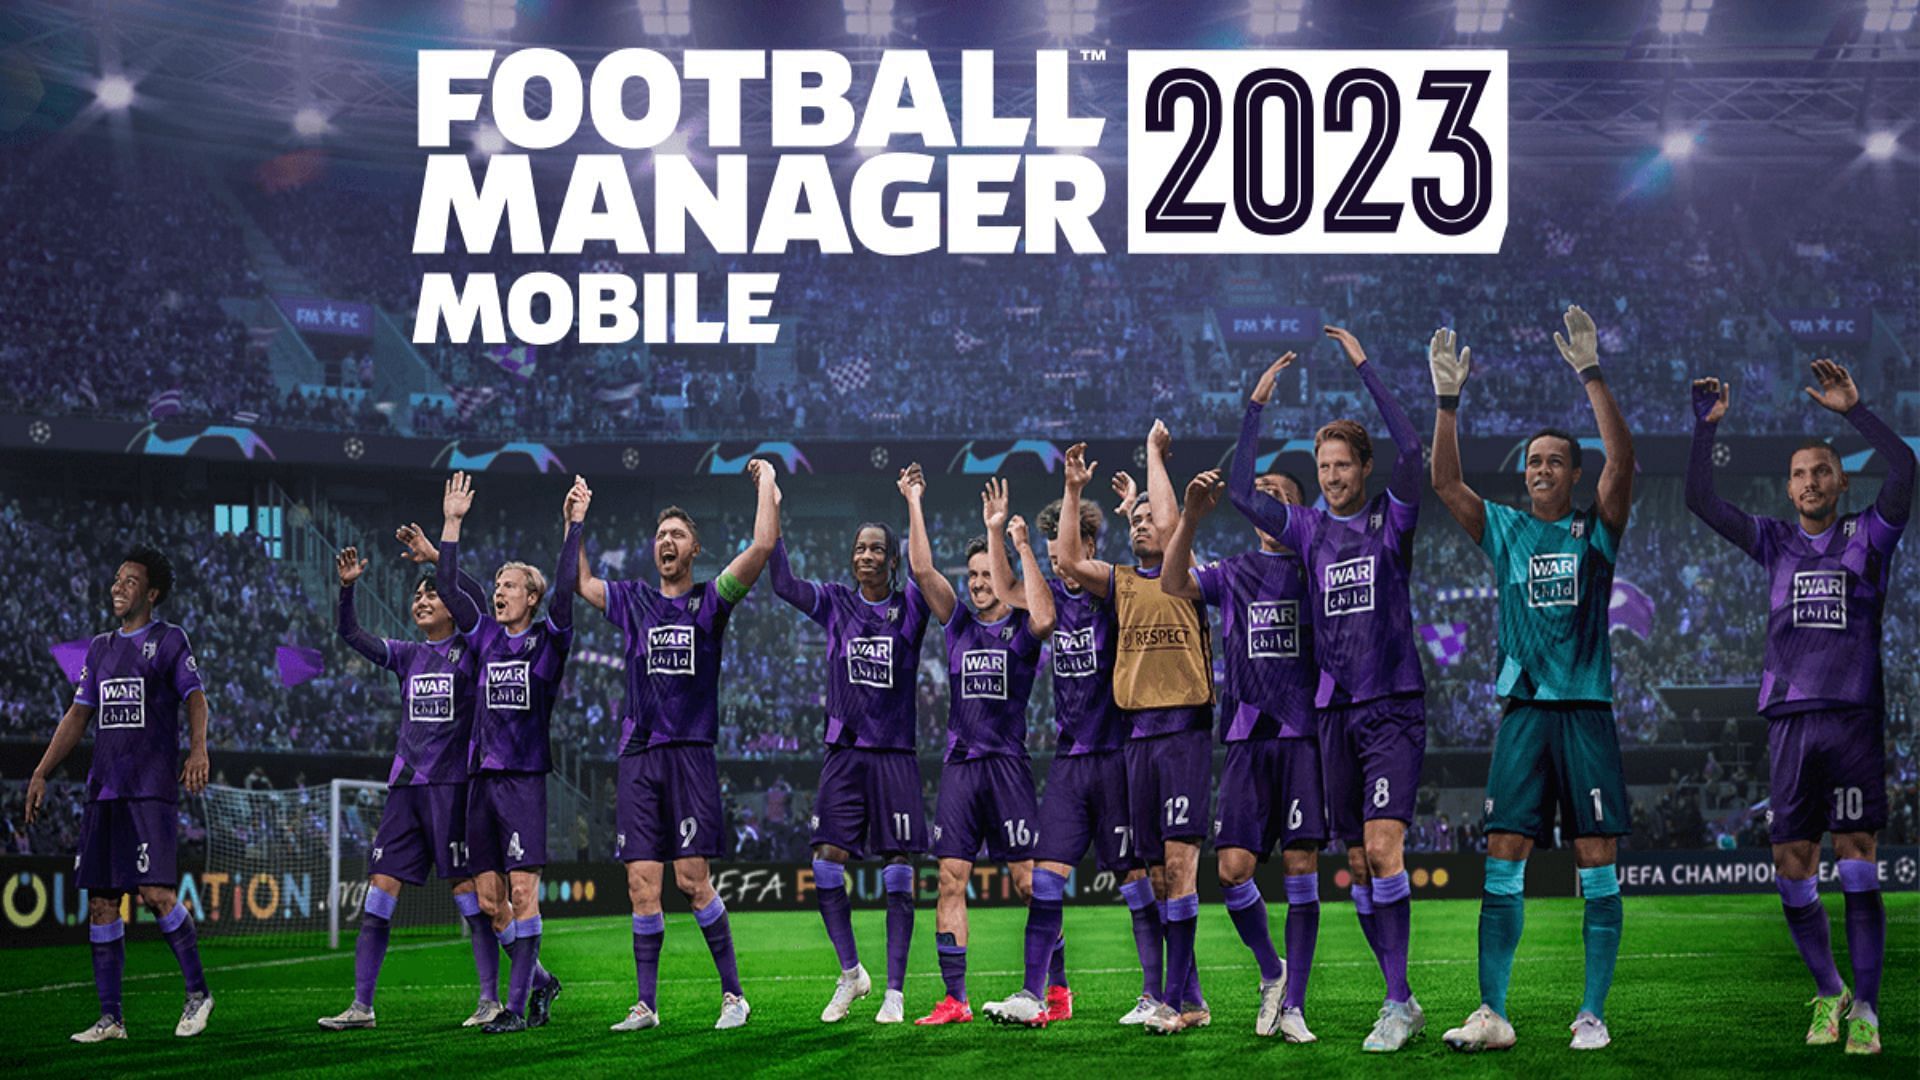 Football Manager 2023 Mobile (Image via Football Manager)